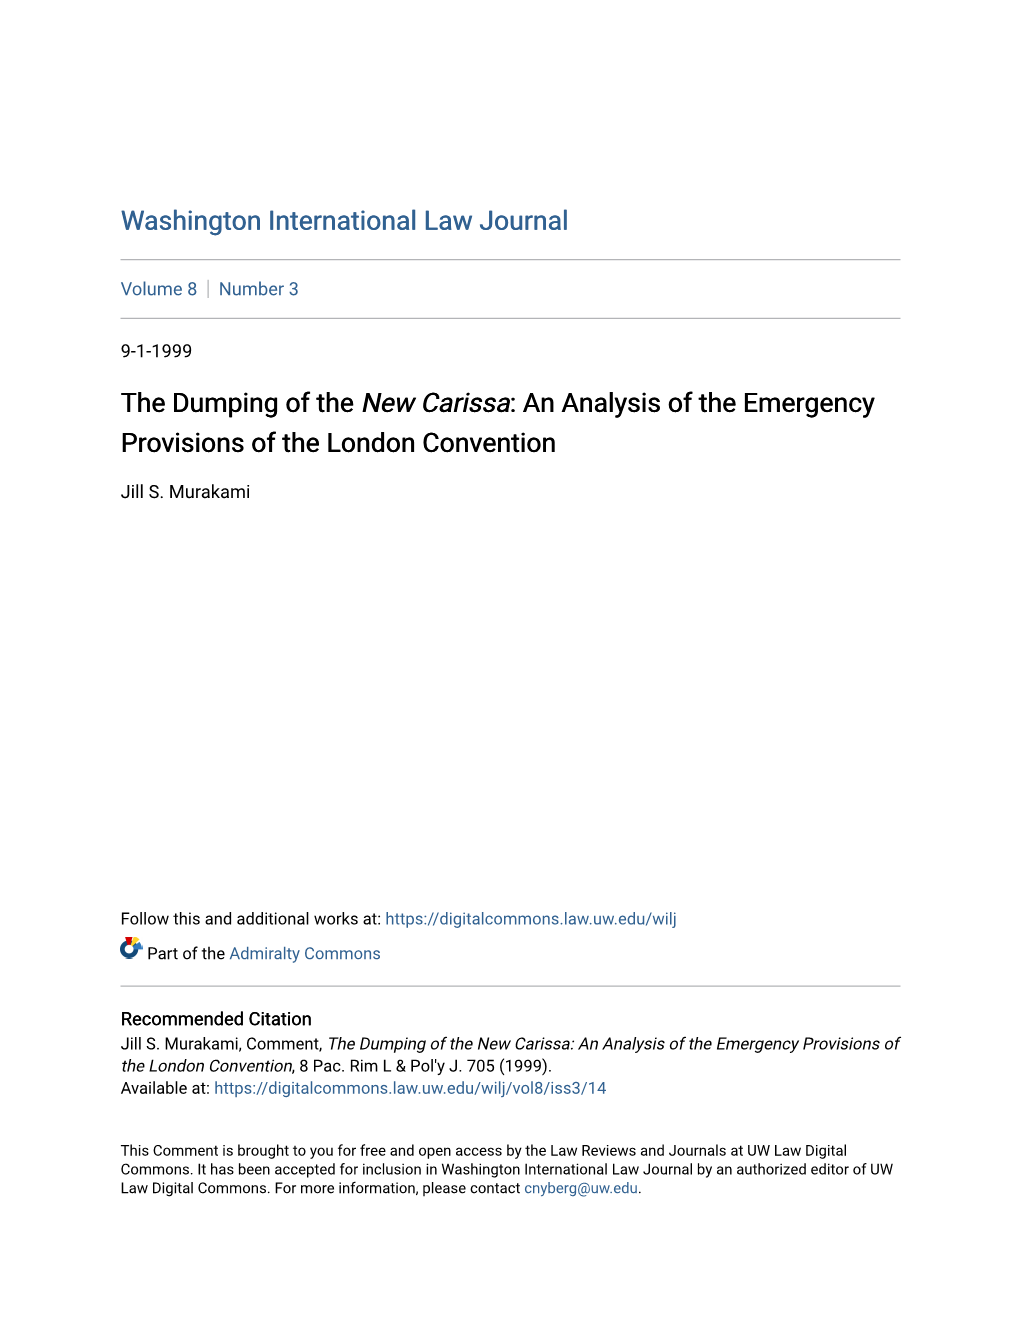 The Dumping of the New Carissa: an Analysis of the Emergency Provisions of the London Convention